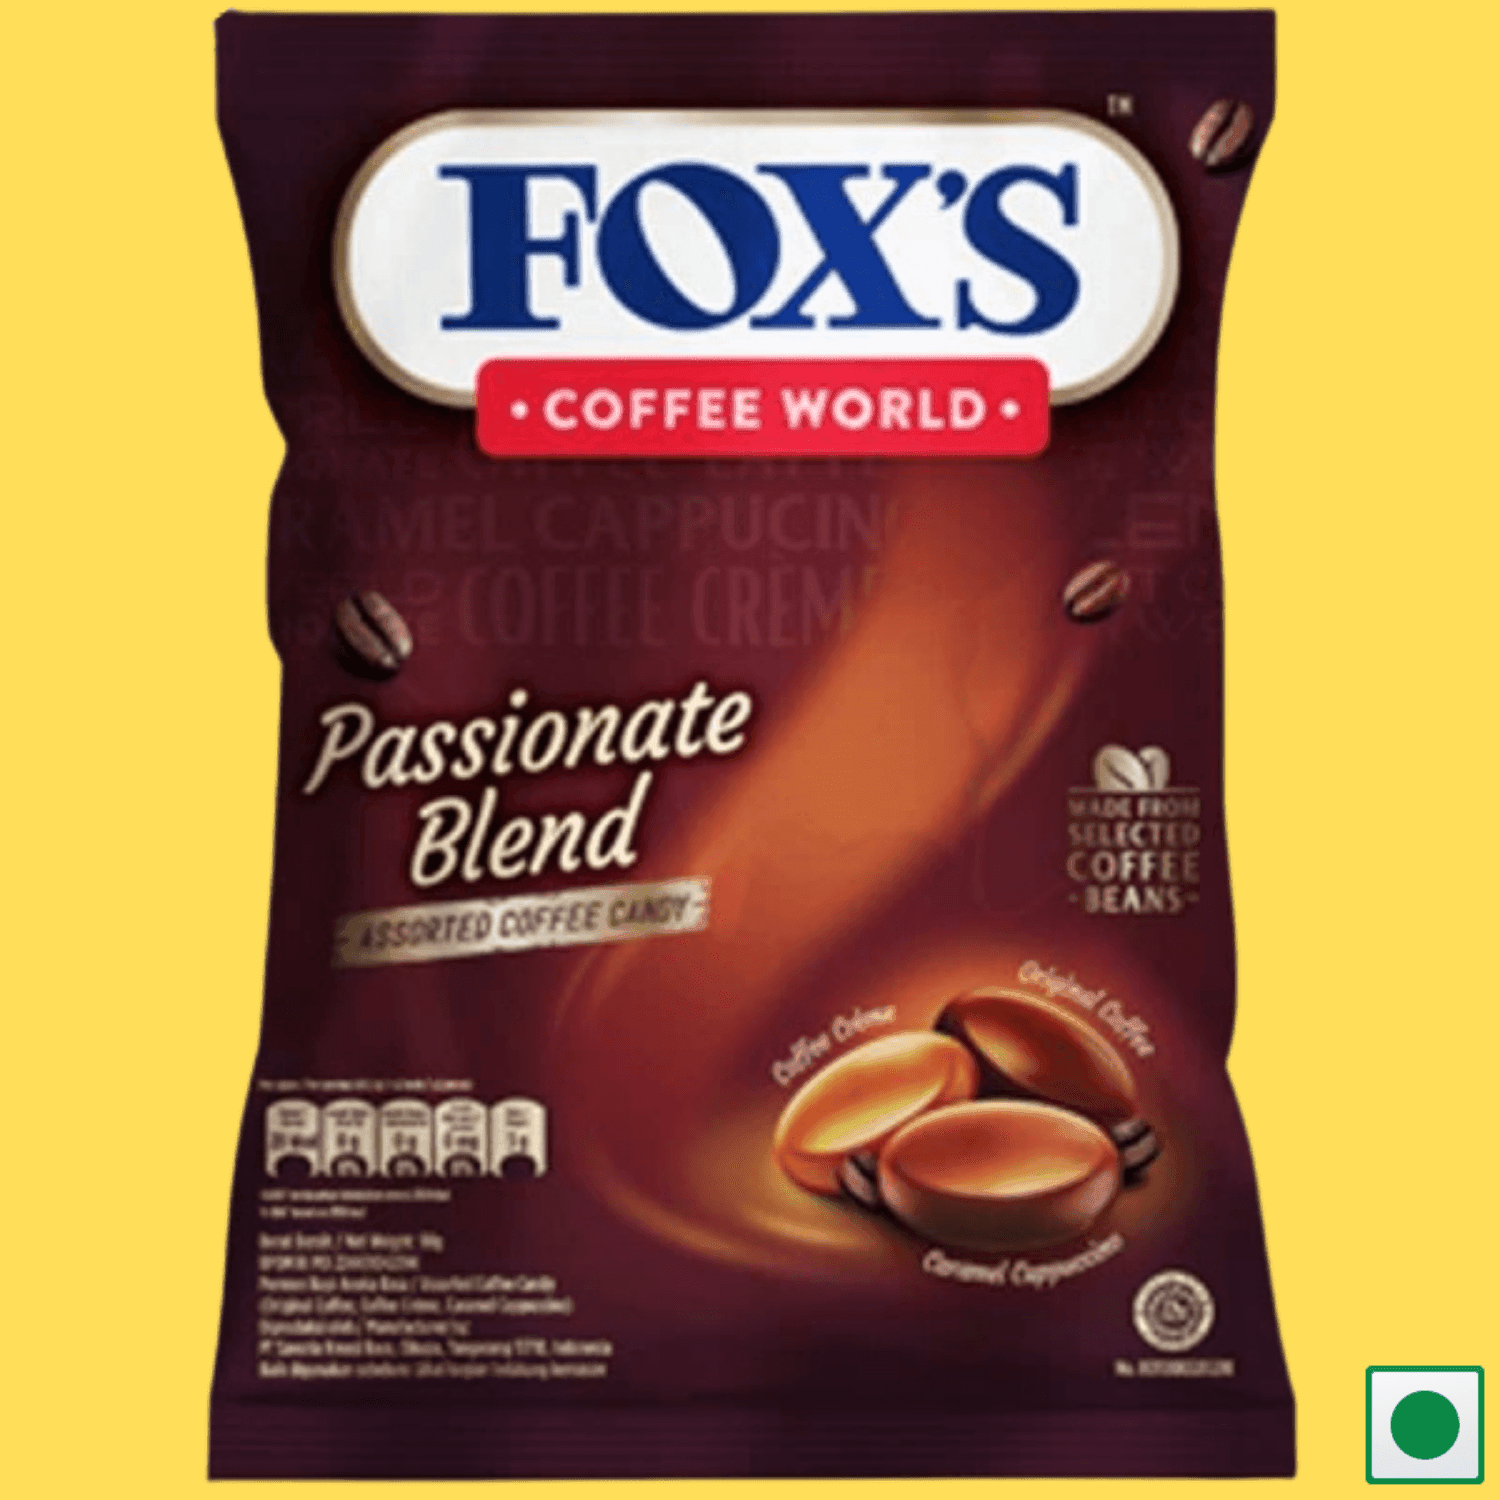 Fox's Coffee World Passionate Blend, 90g (Imported) - Super 7 Mart